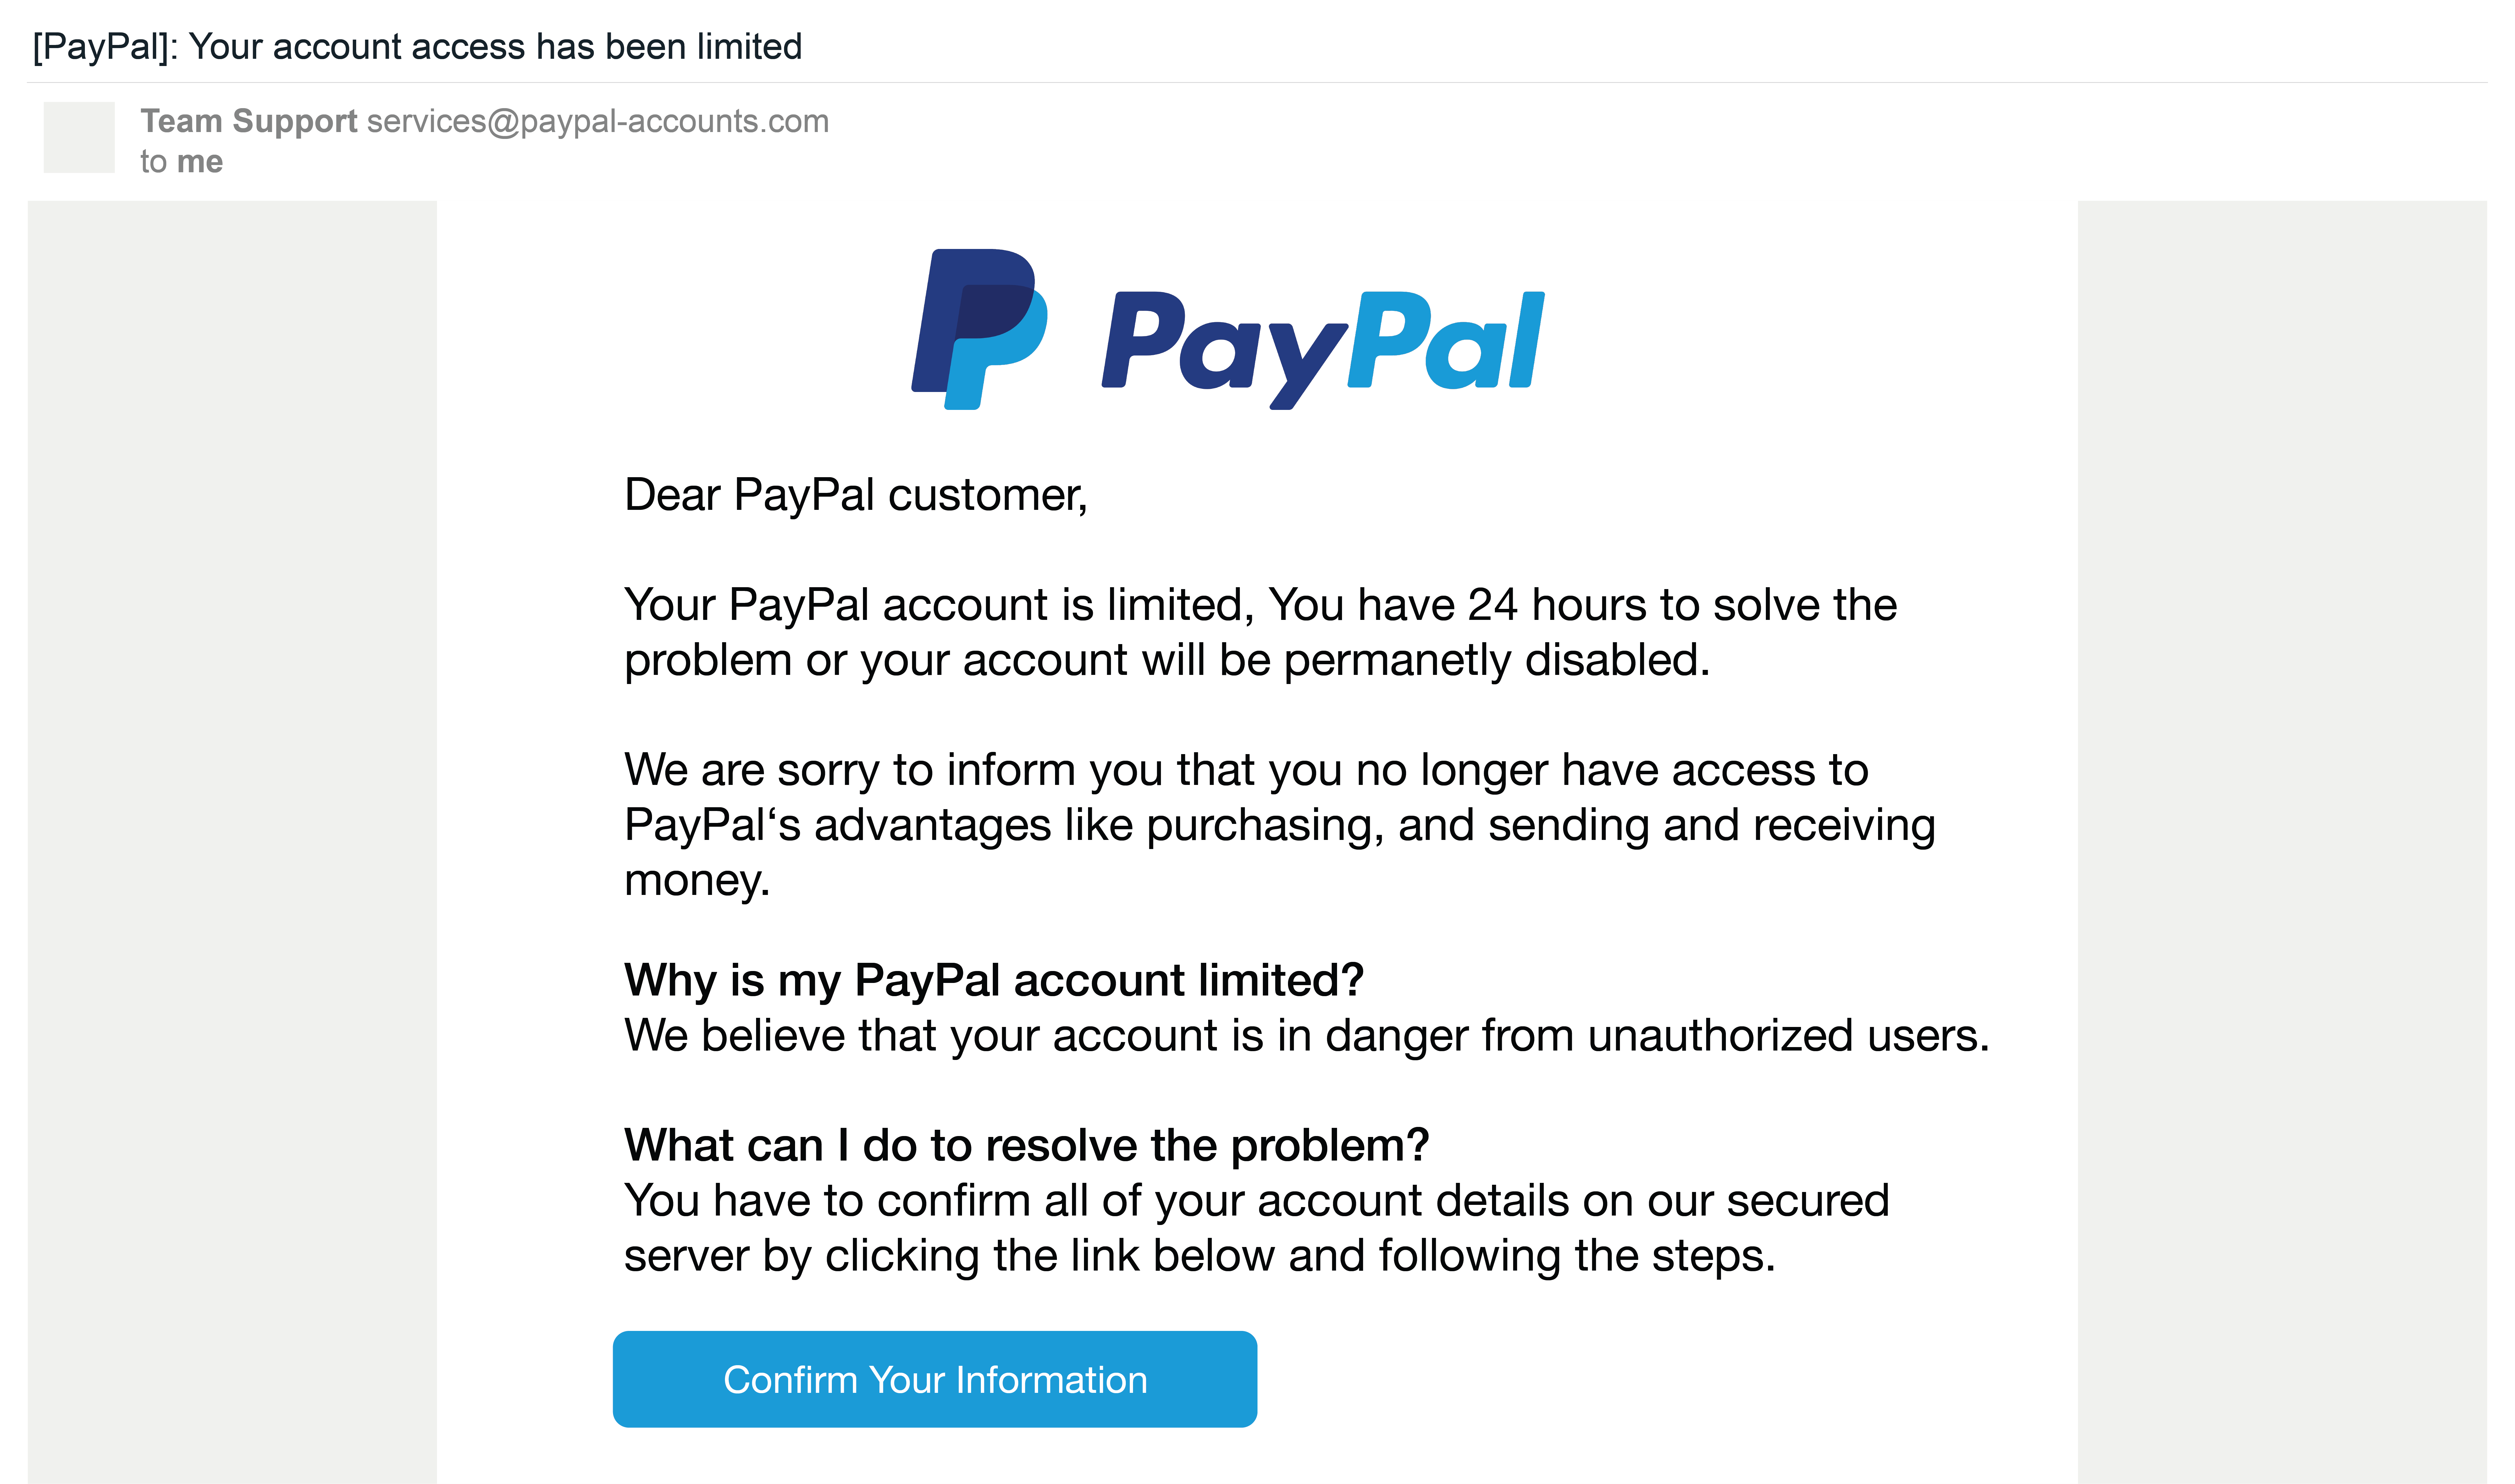 A common example of a PayPaly email phishing scam